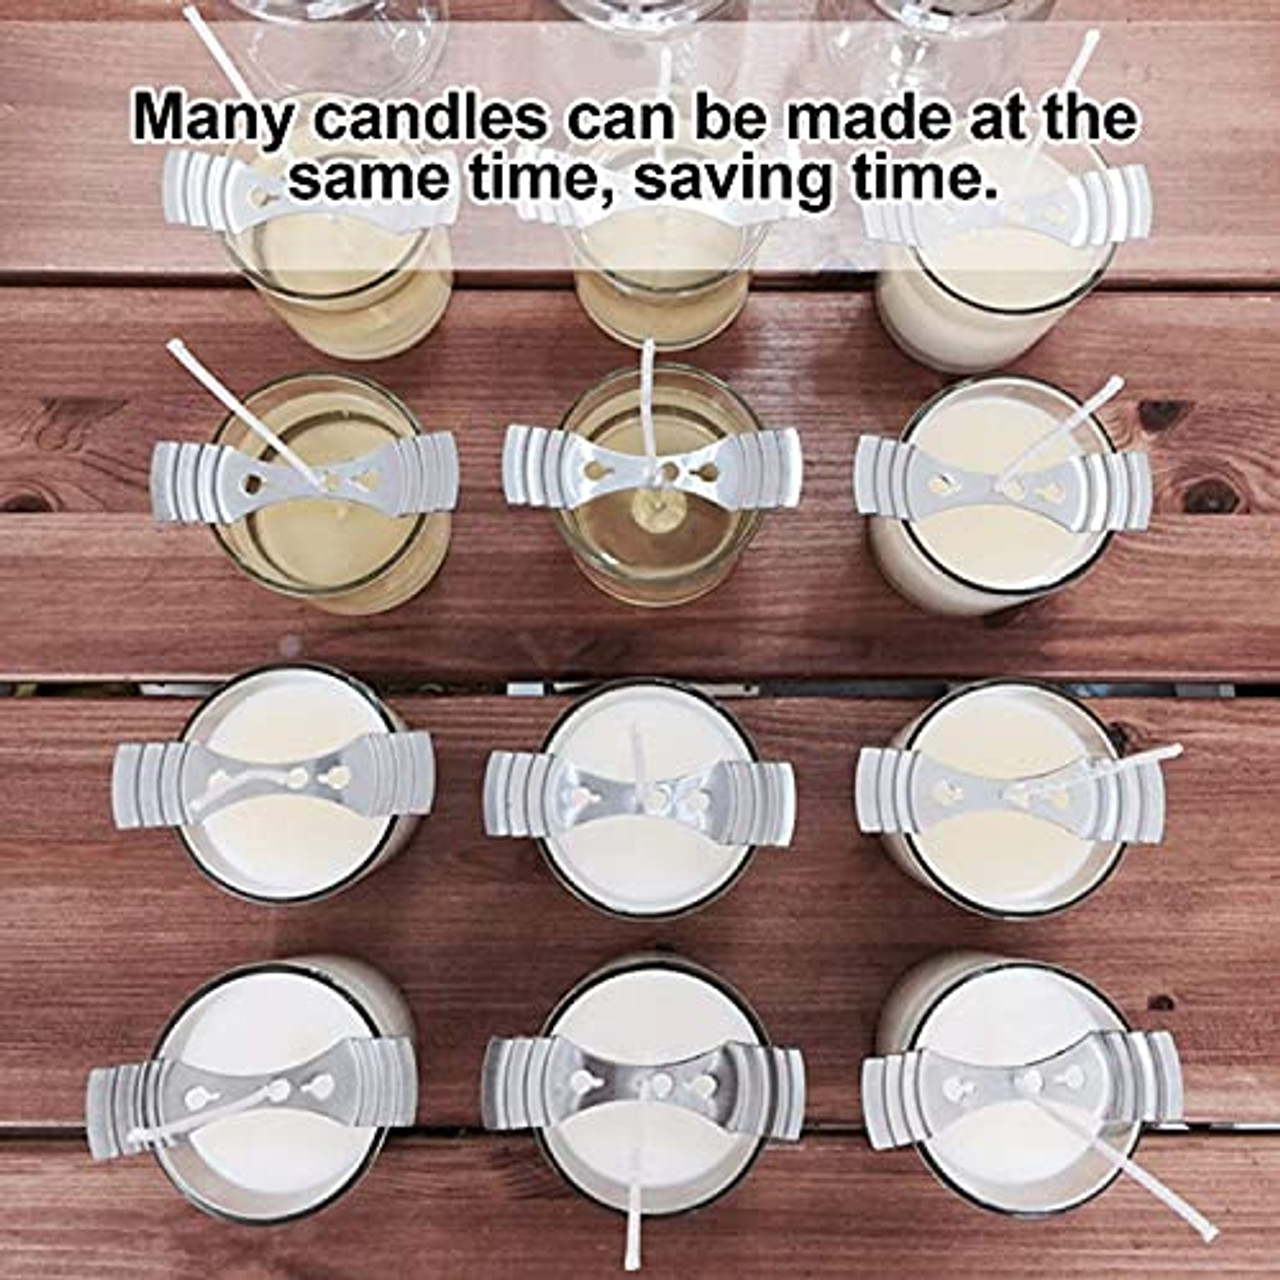  10pcs Metal Candle Wick Holders, Upgraded Candle Wick Centering  Devices, Silver Stainless Steel Candle Wick Holder for Candle Making : Home  & Kitchen